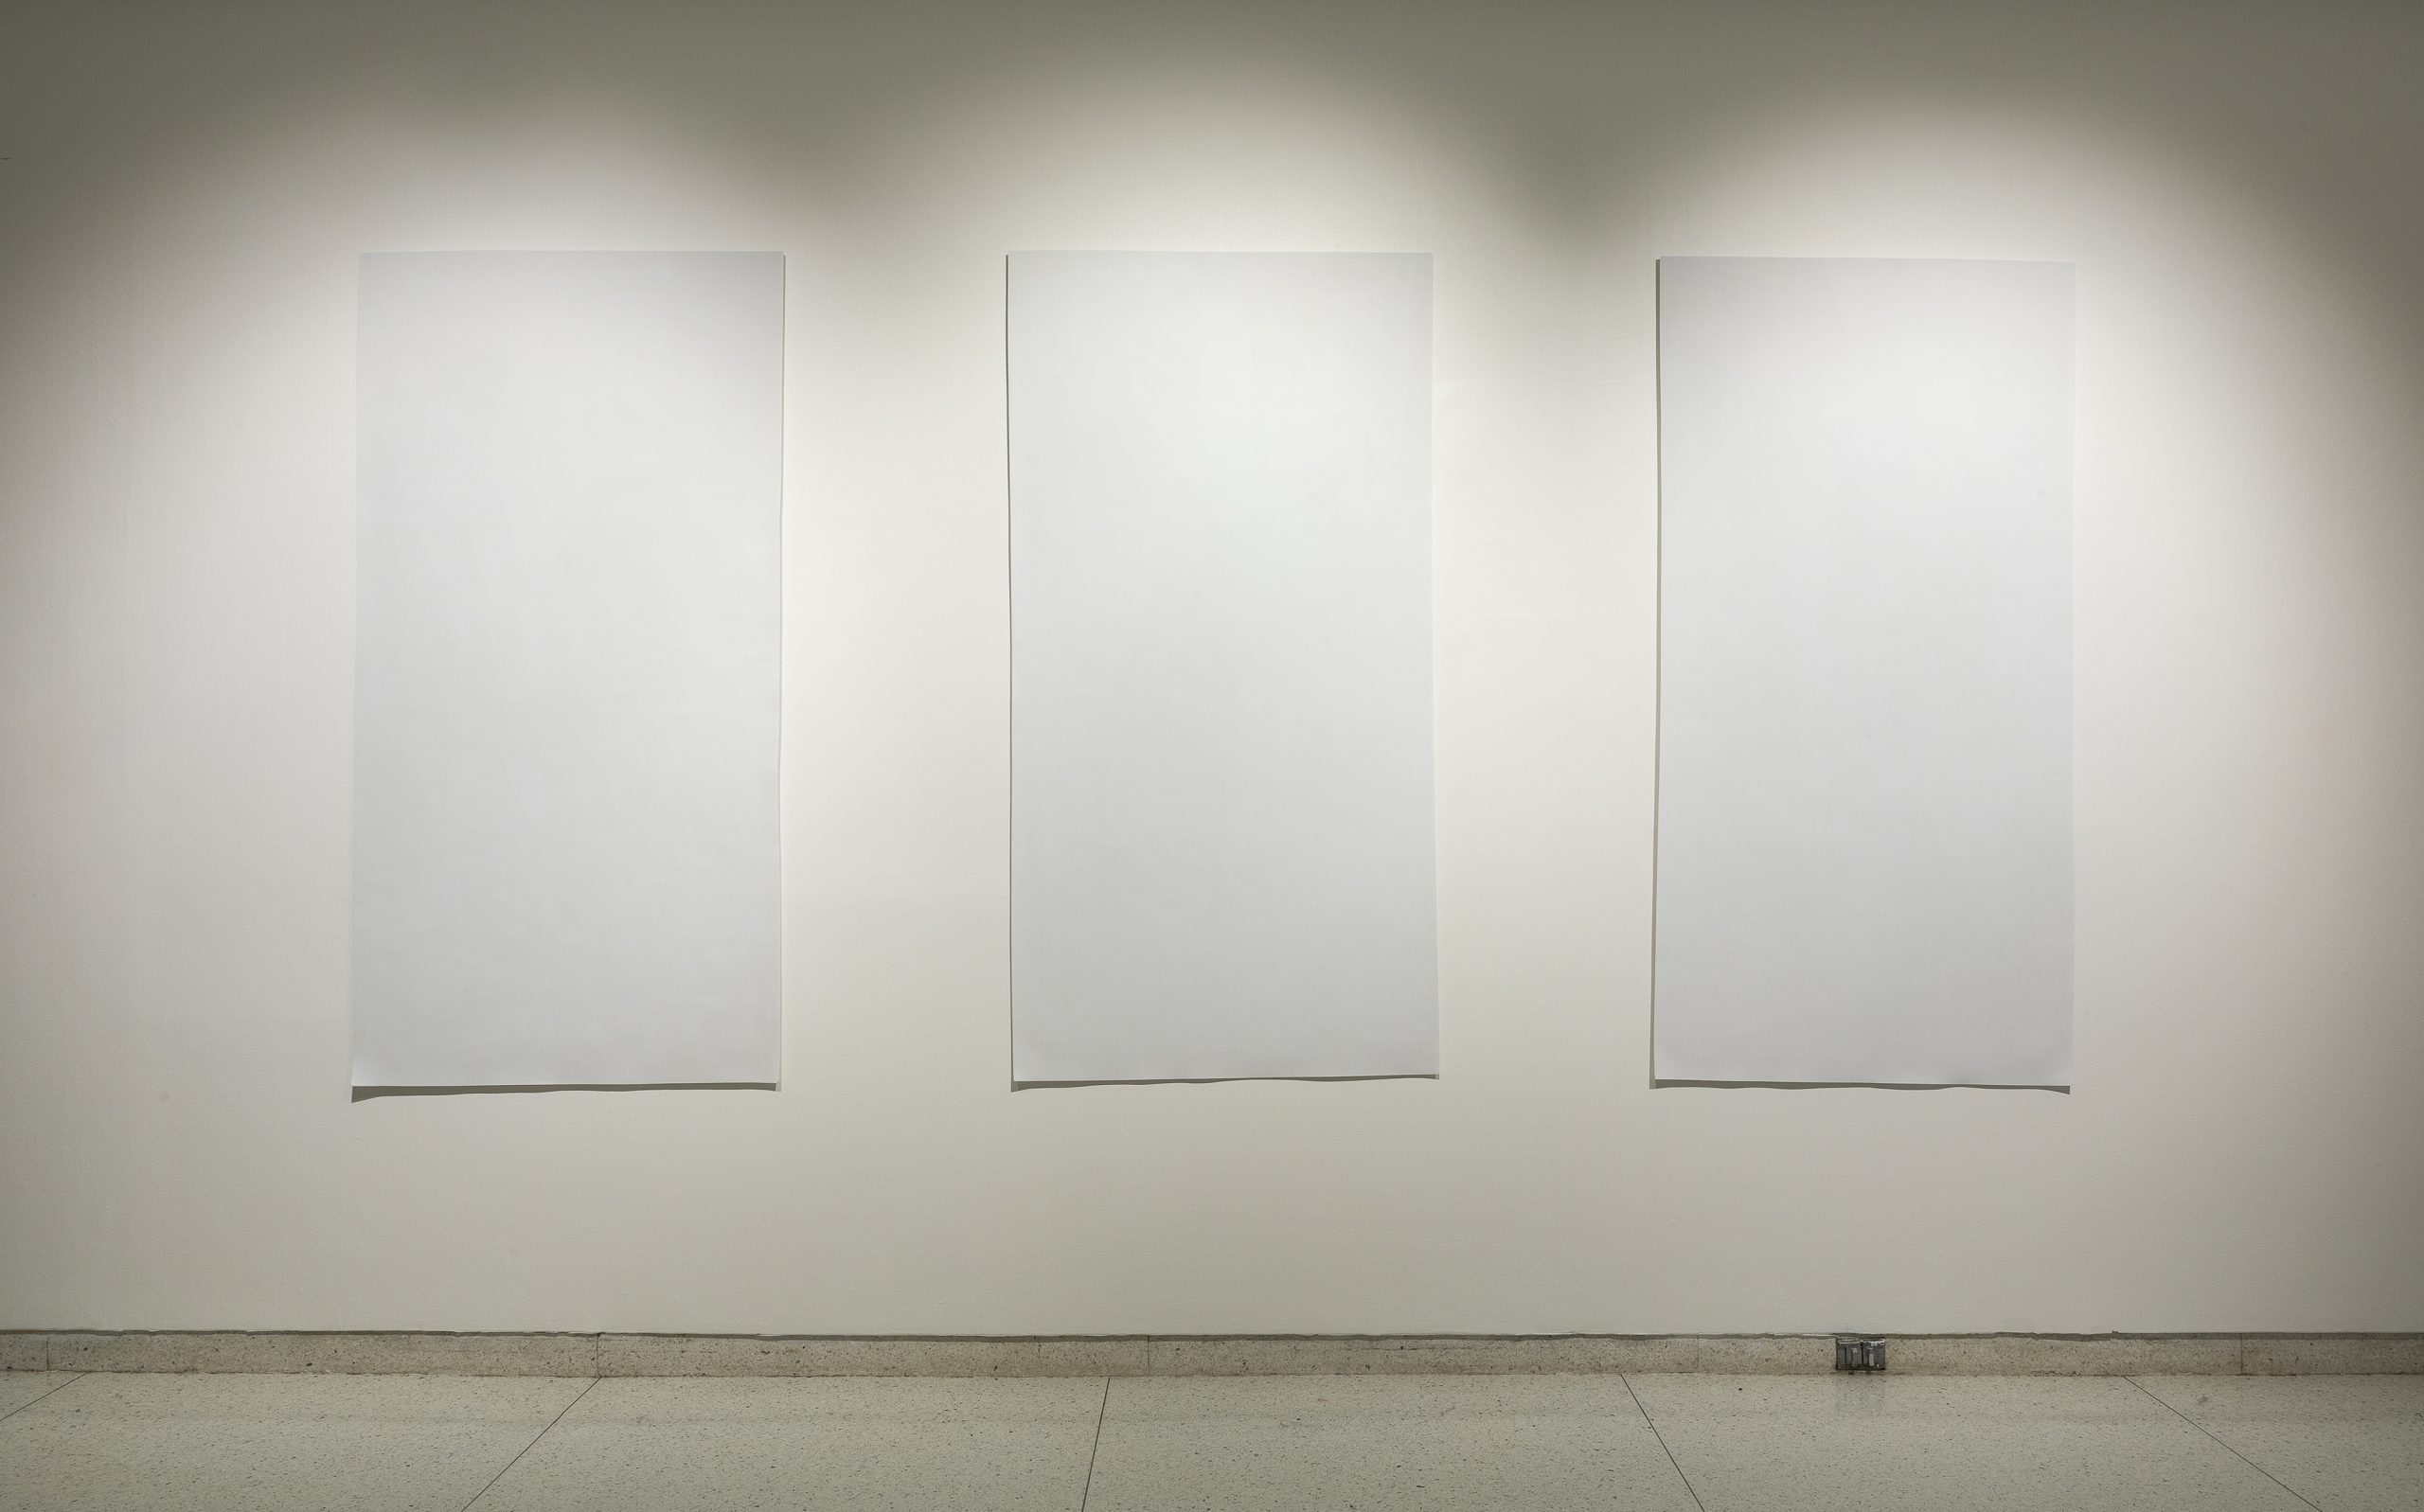 Liu Jianhua, Blank Paper, 2009–12. Installation view, The Allure of Matter: Material Art from China, Smart Museum of Art